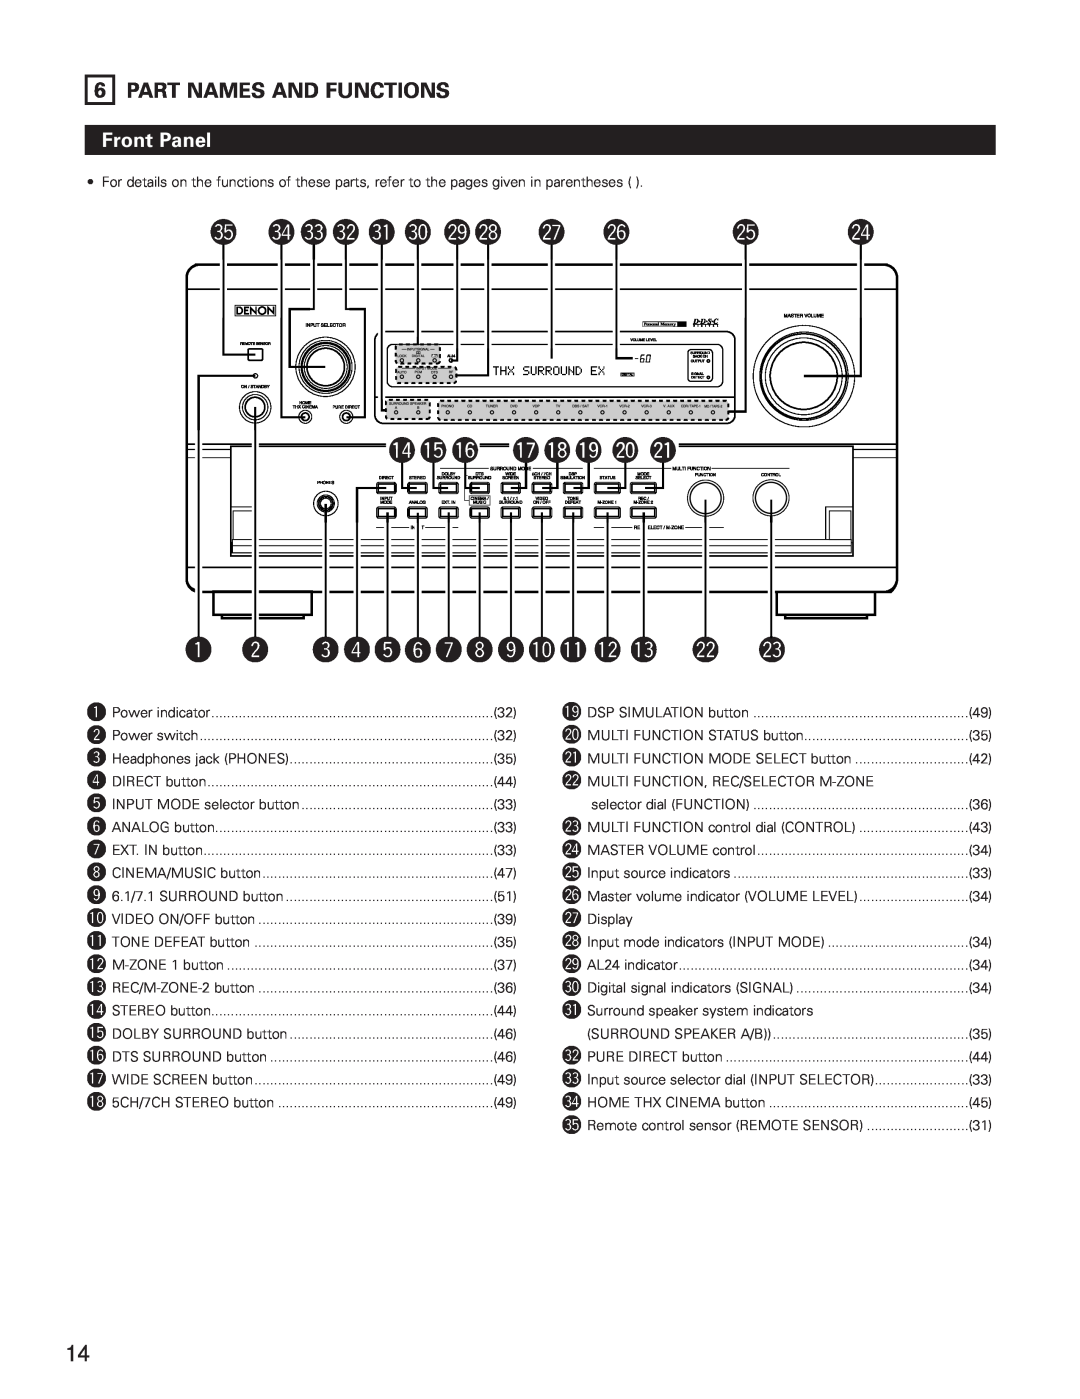 Denon AVR-5800 operating instructions Part Names And Functions, Front Panel 